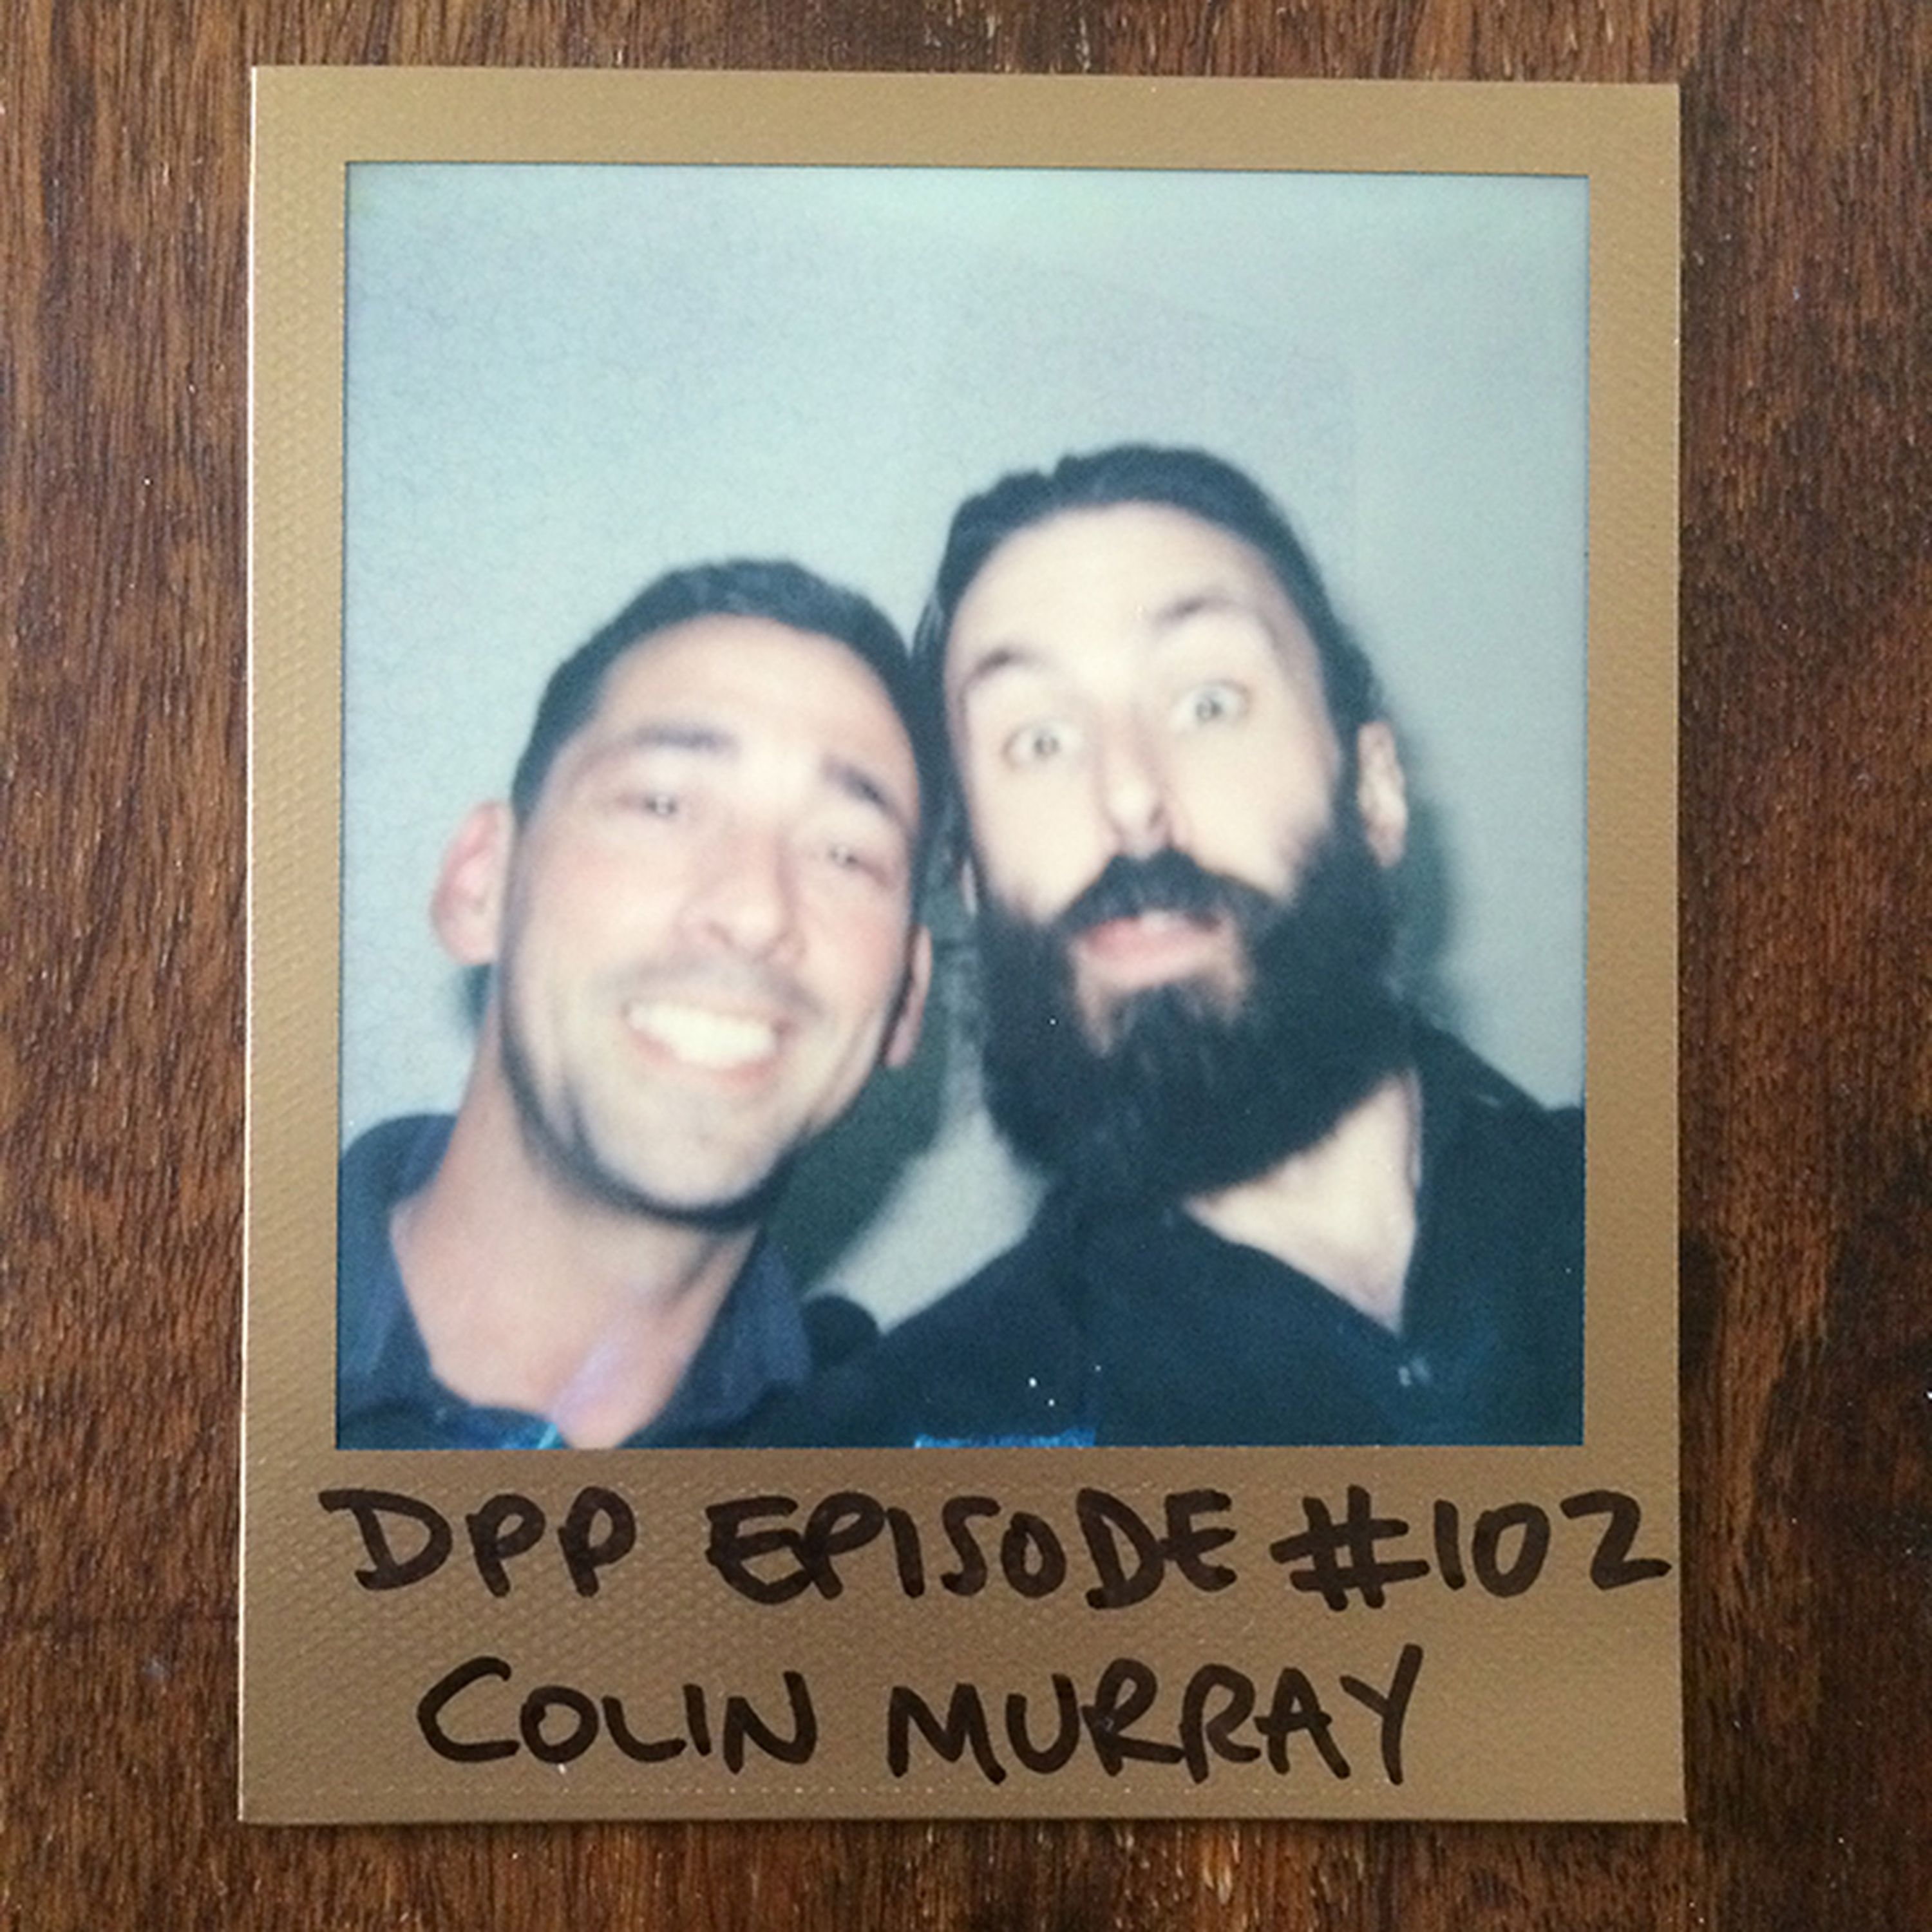 Colin Murray (part 1) - Distraction Pieces Podcast with Scroobius Pip #102